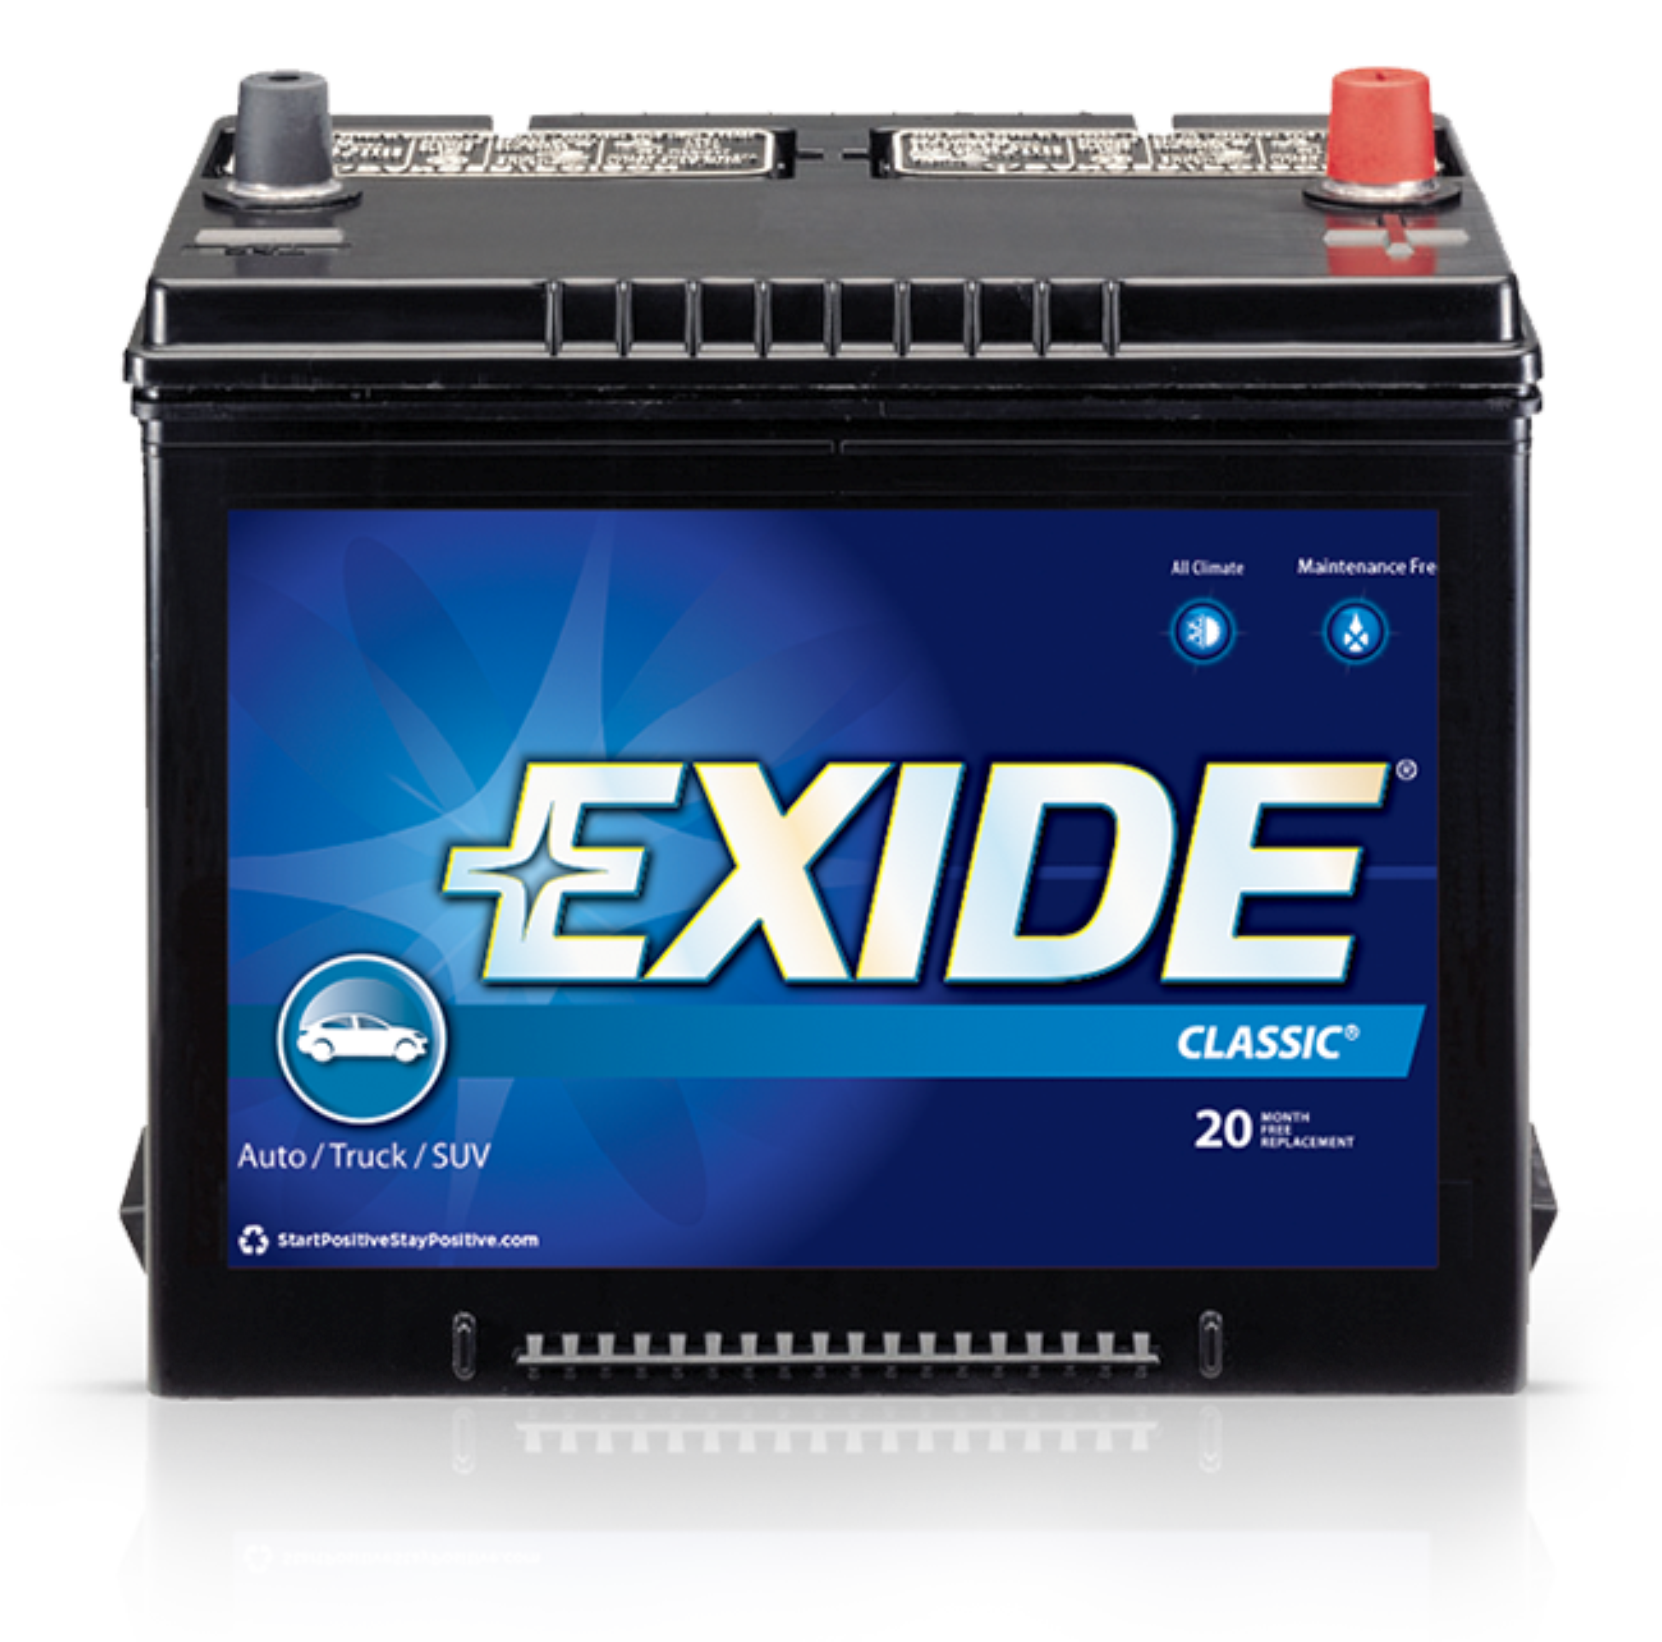 Exide, at Rs 215, is a good buy - The Sunday Guardian Live